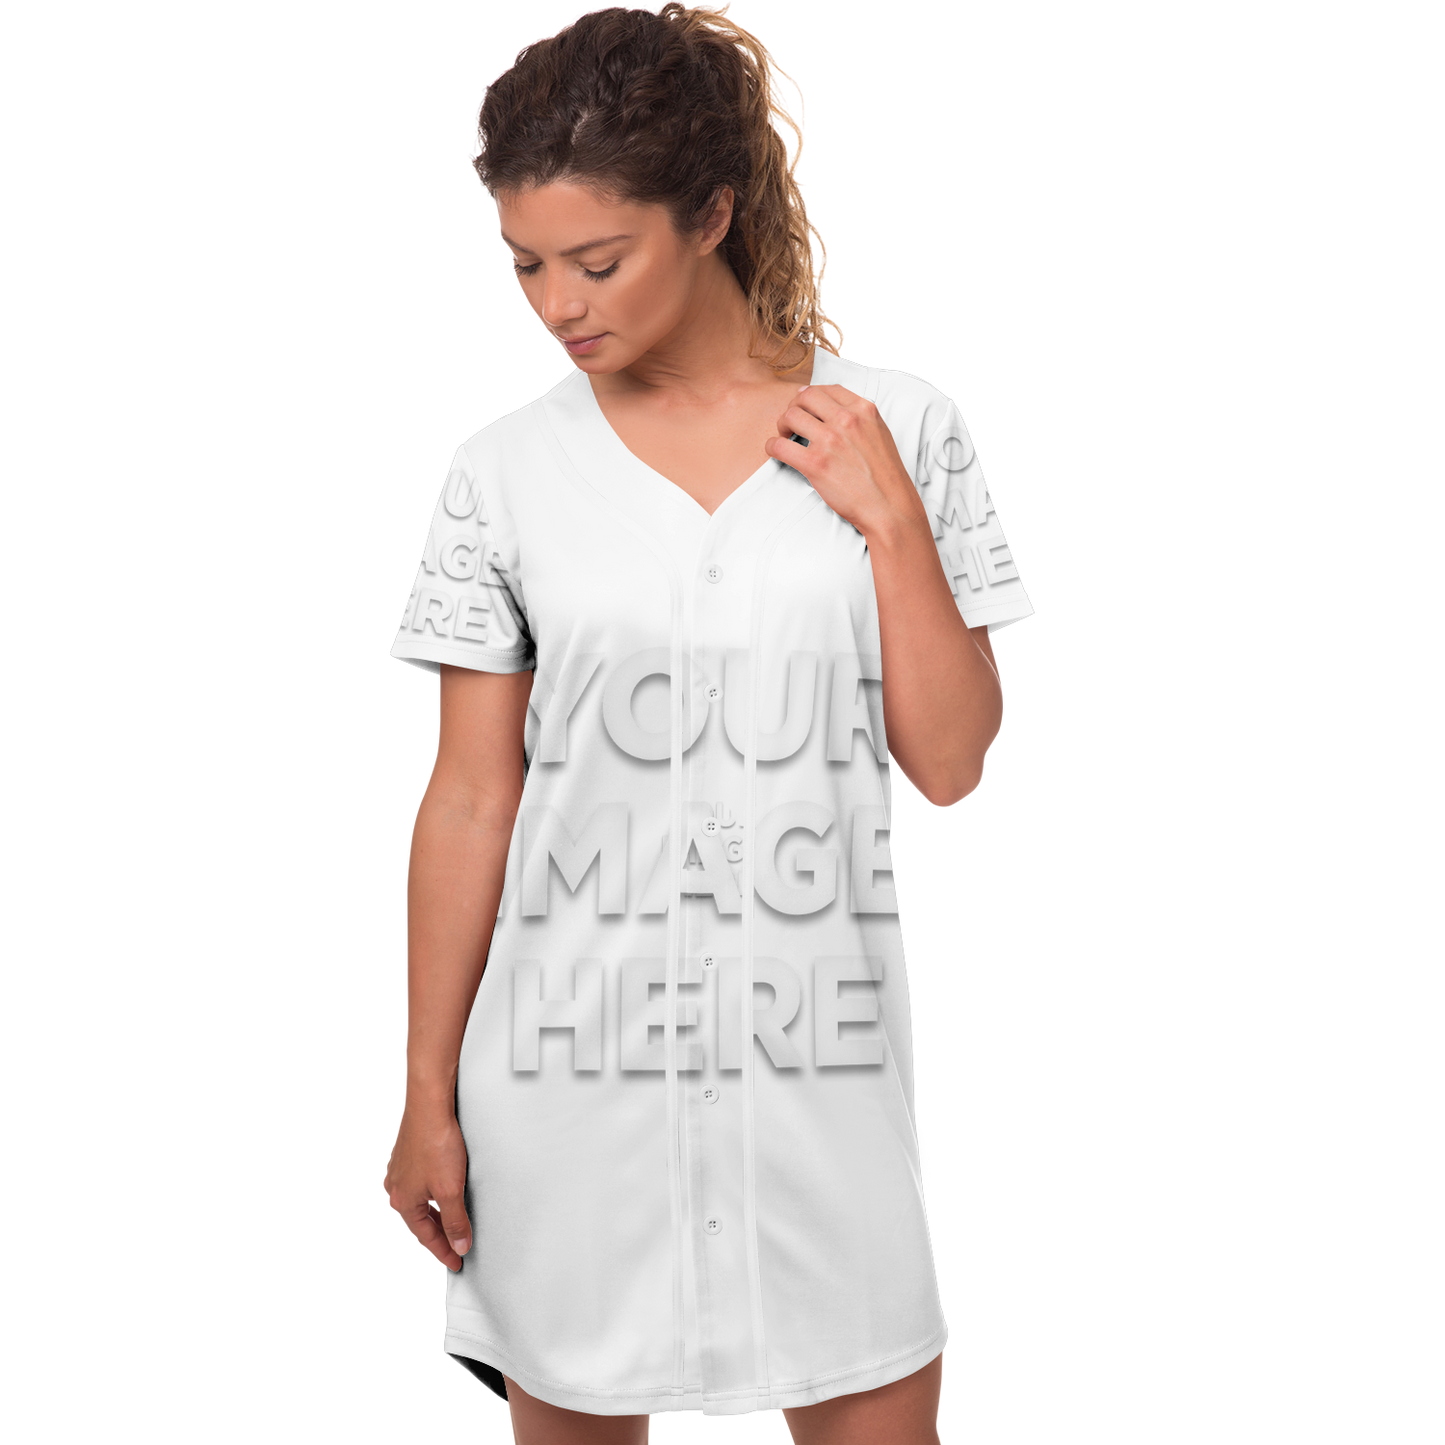 CANVAS BASEBALL JERSEY DRESS - BUILD YOUR OWN YGM